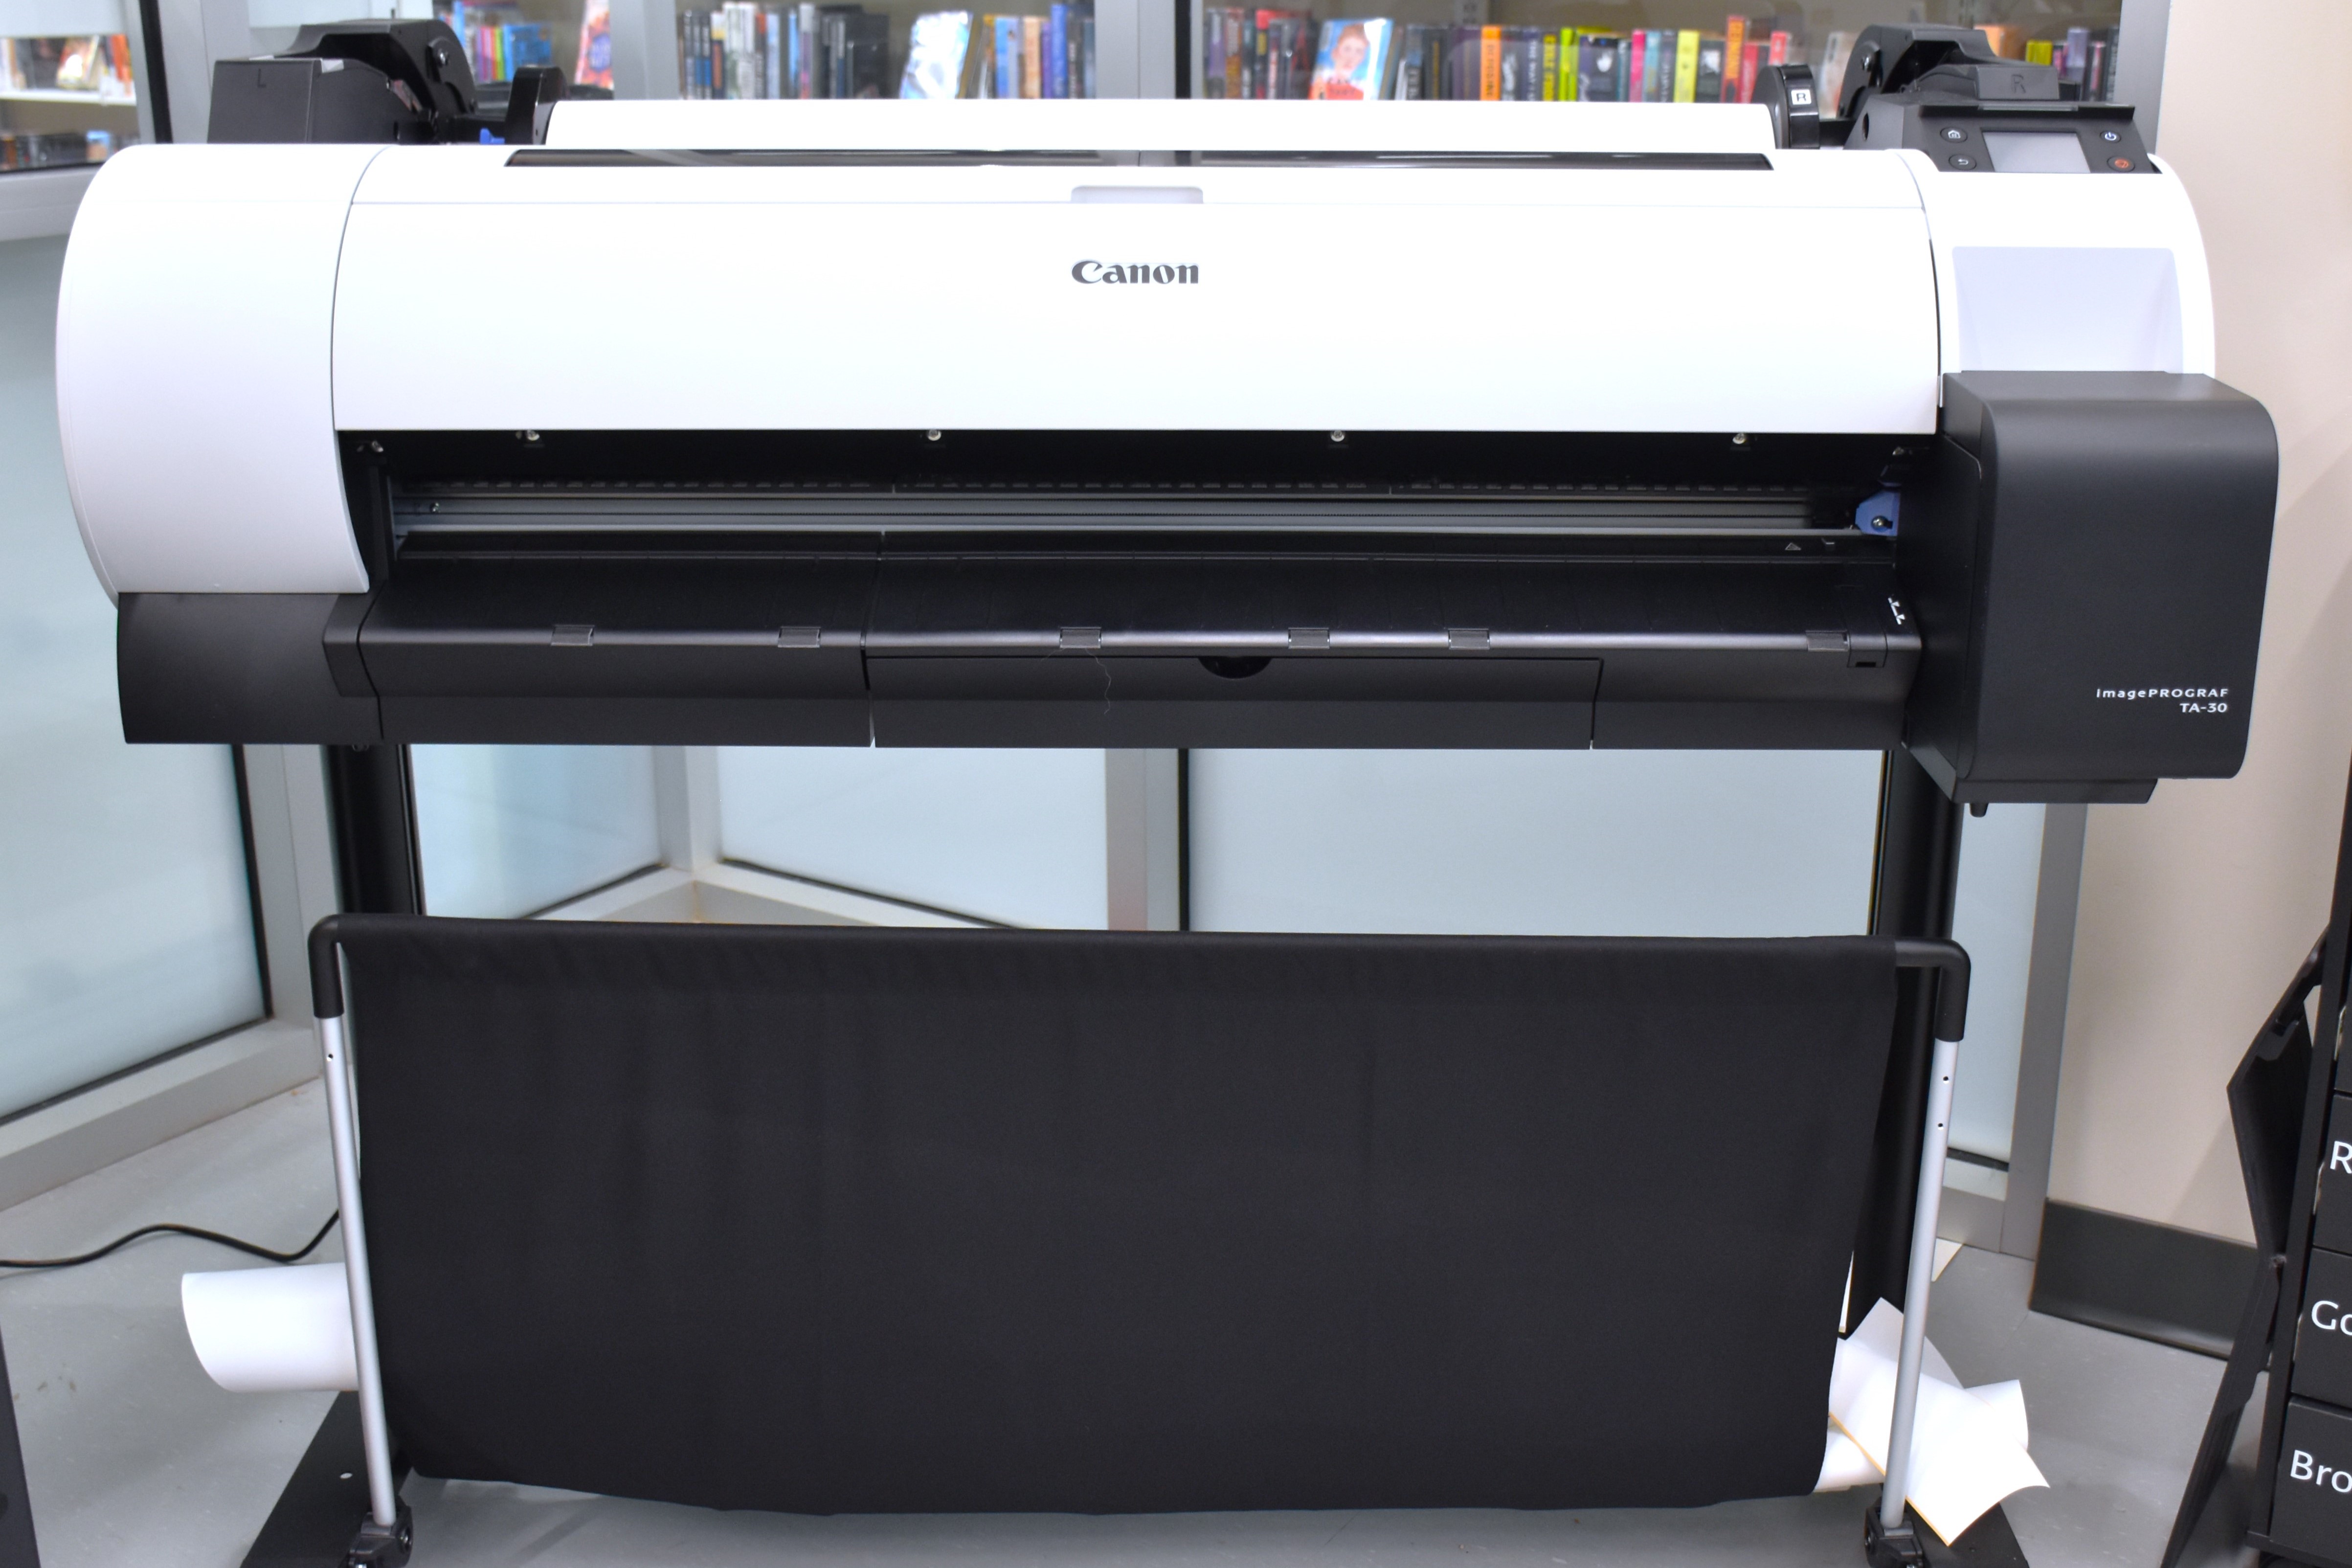 Image shows a Canon TA30 Large Format Printer.